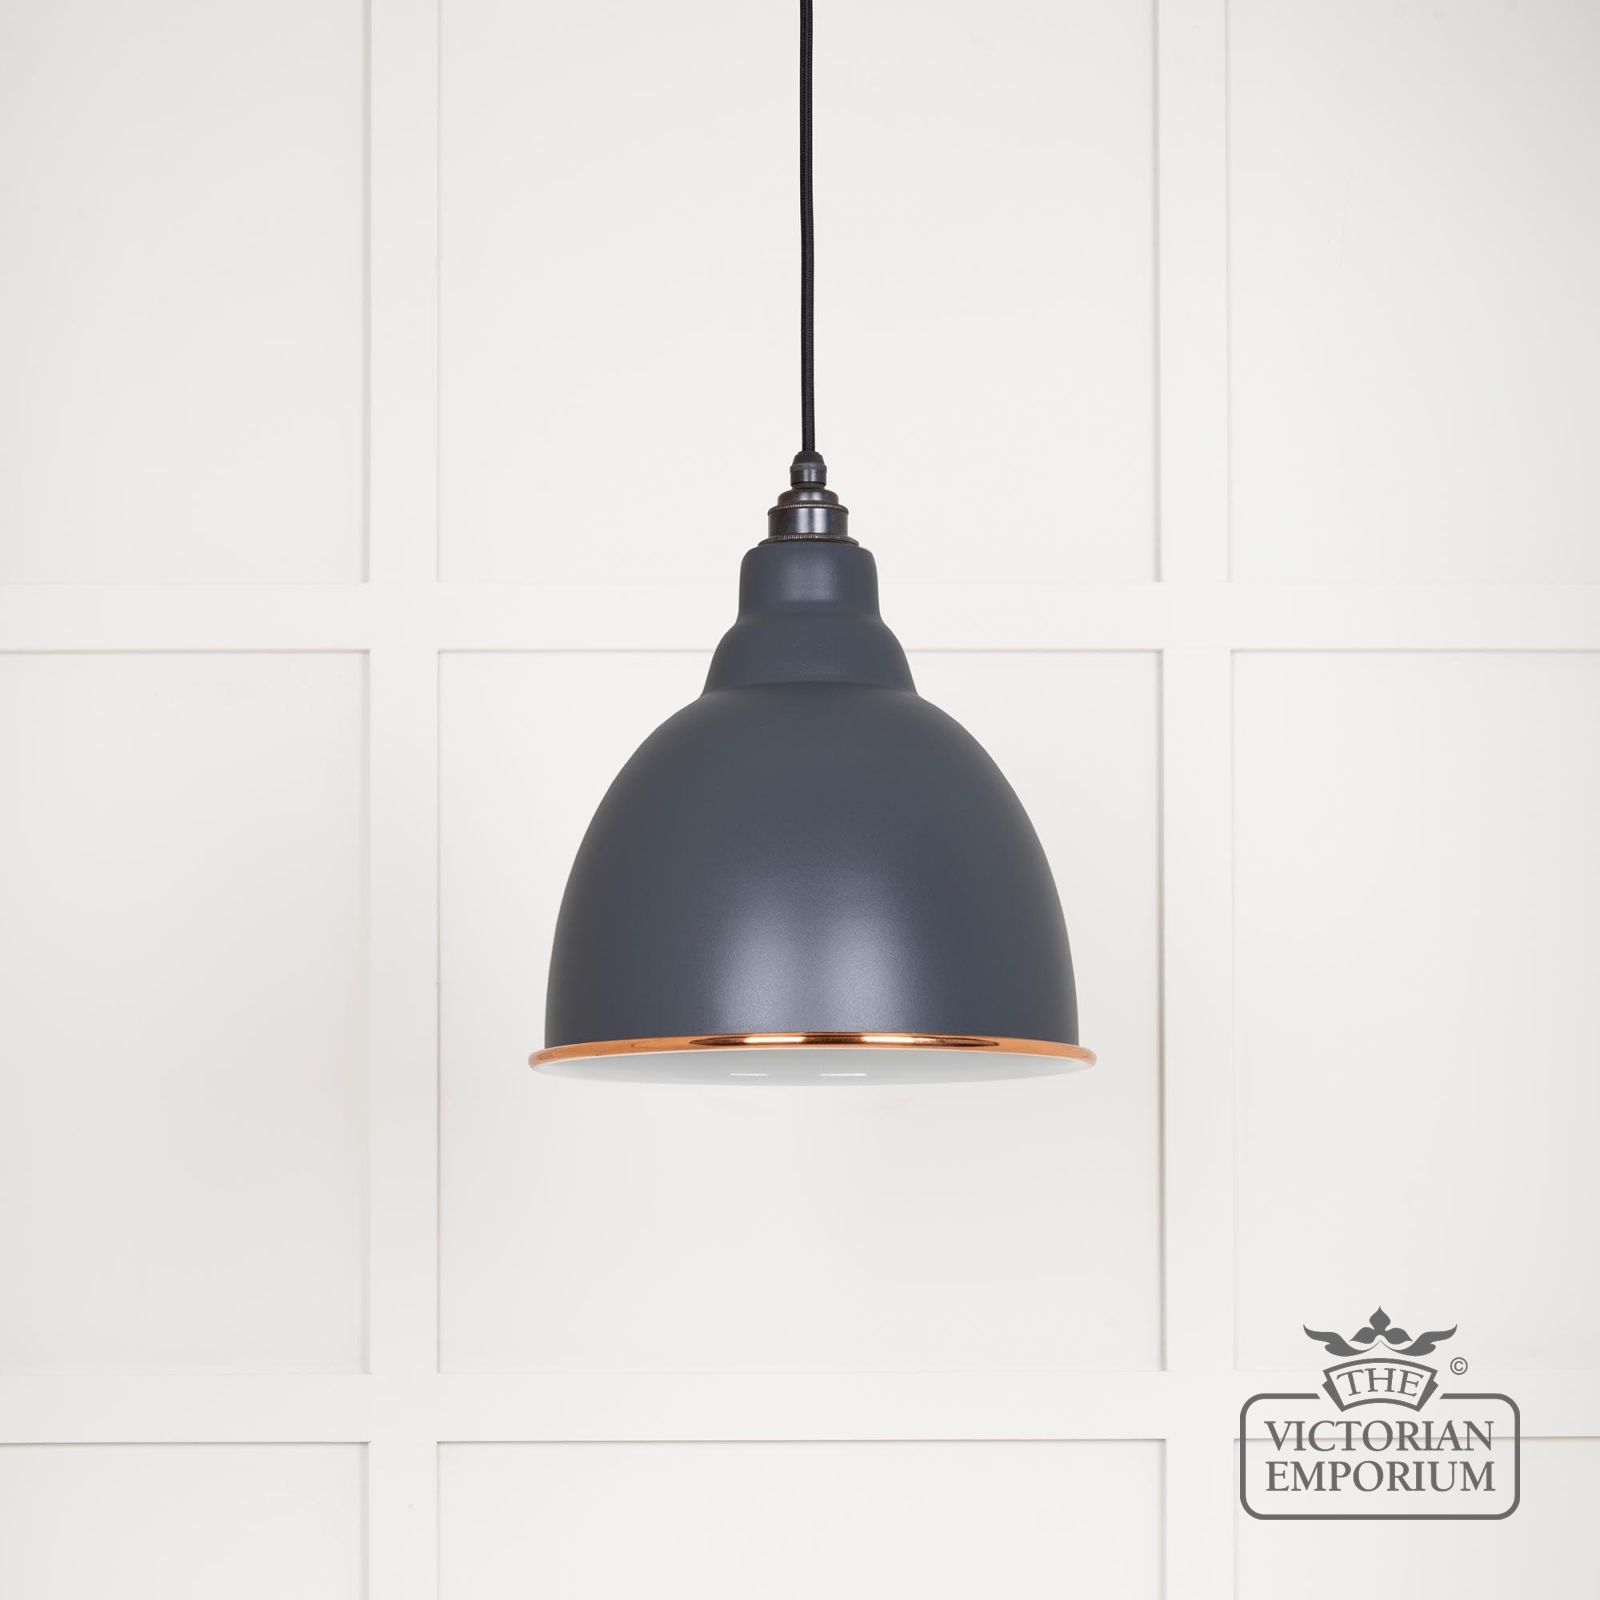 Brindle pendant light in Slate with white gloss interior